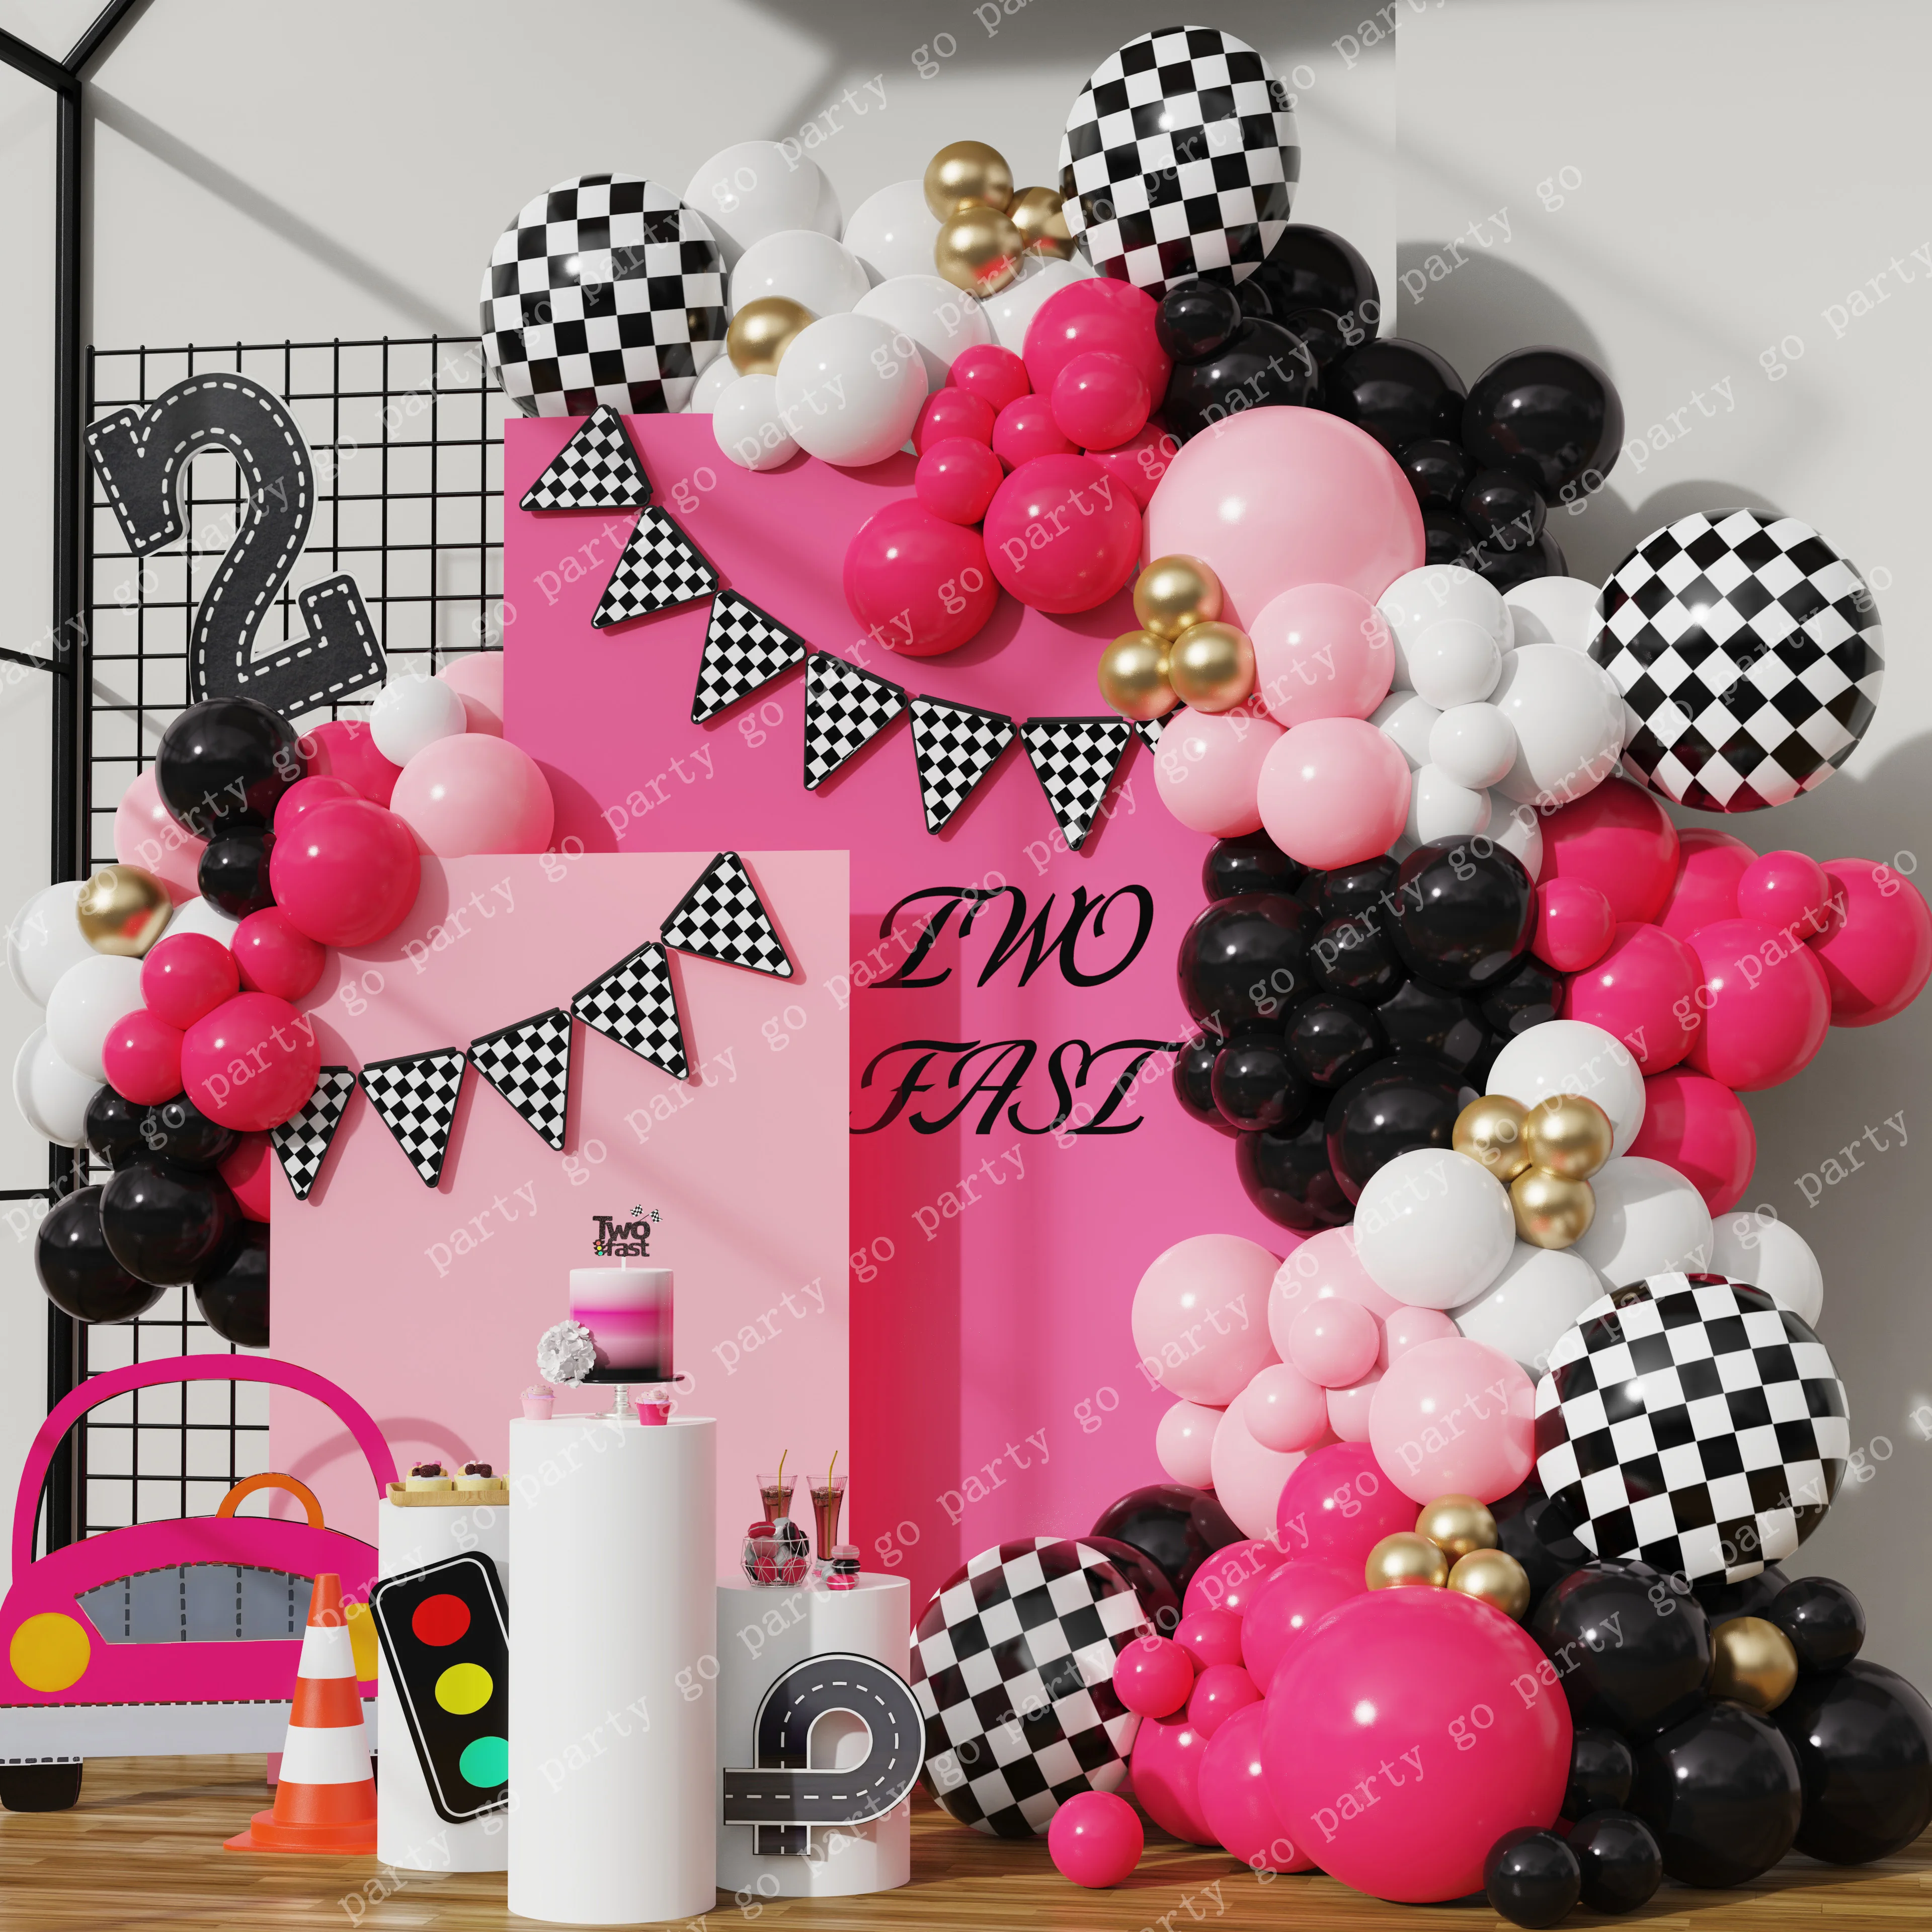 

124pcs Racing Theme Pink Gold Latex Black White Lattice Foil Balloons Garland Arch Kit for Kids Birthday Baby Shower Party Decor